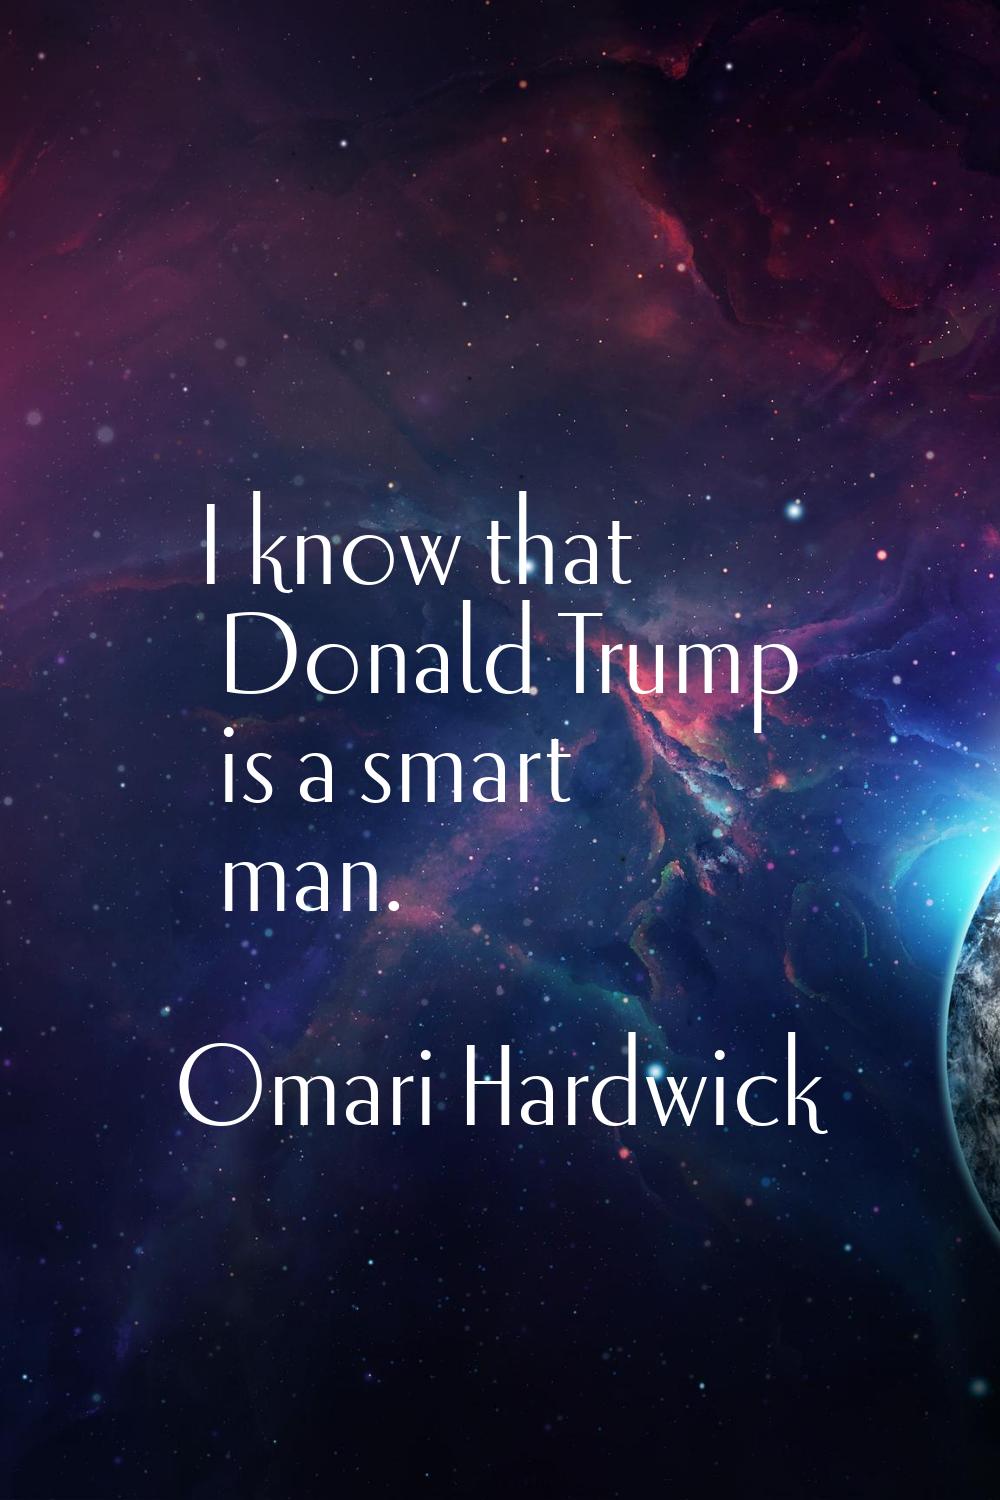 I know that Donald Trump is a smart man.